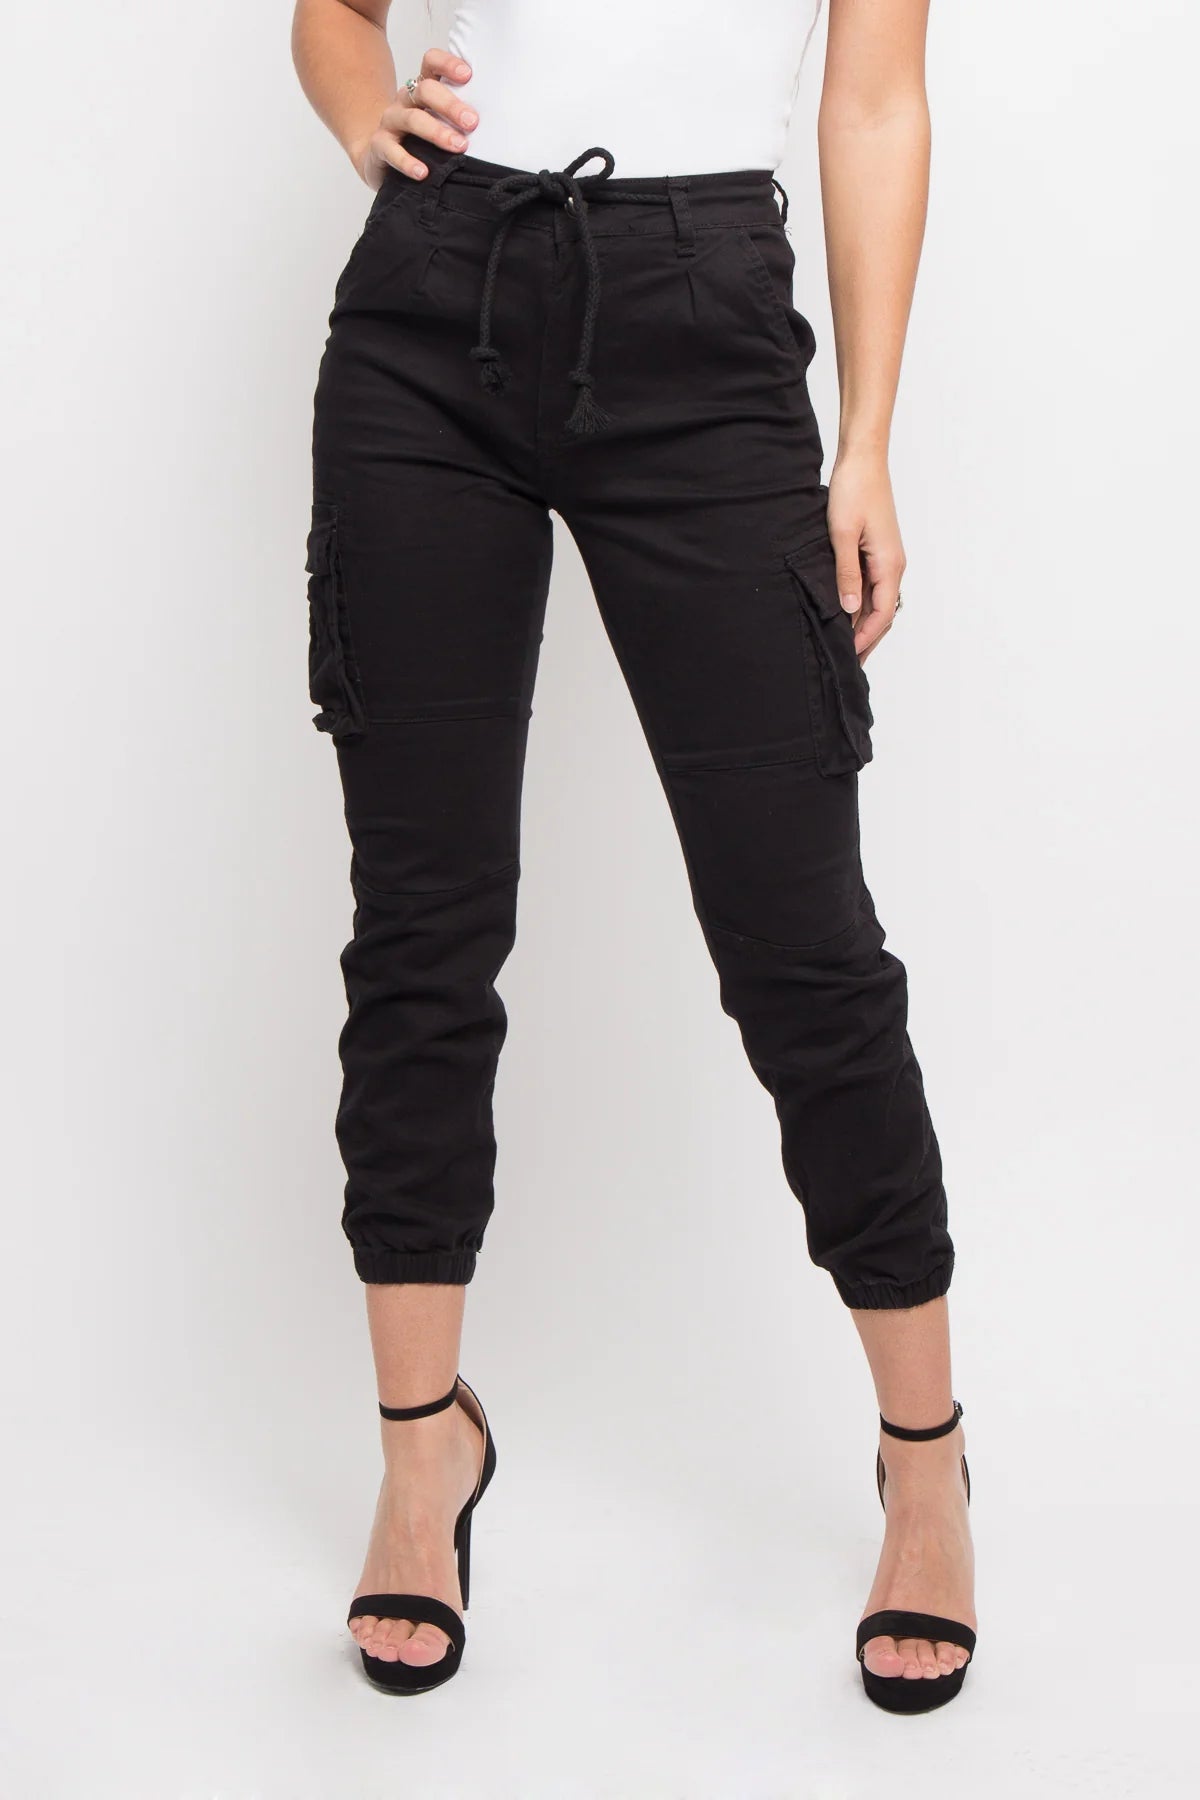 Women's Essential Basic Cropped Colored Cargo Joggers - Black